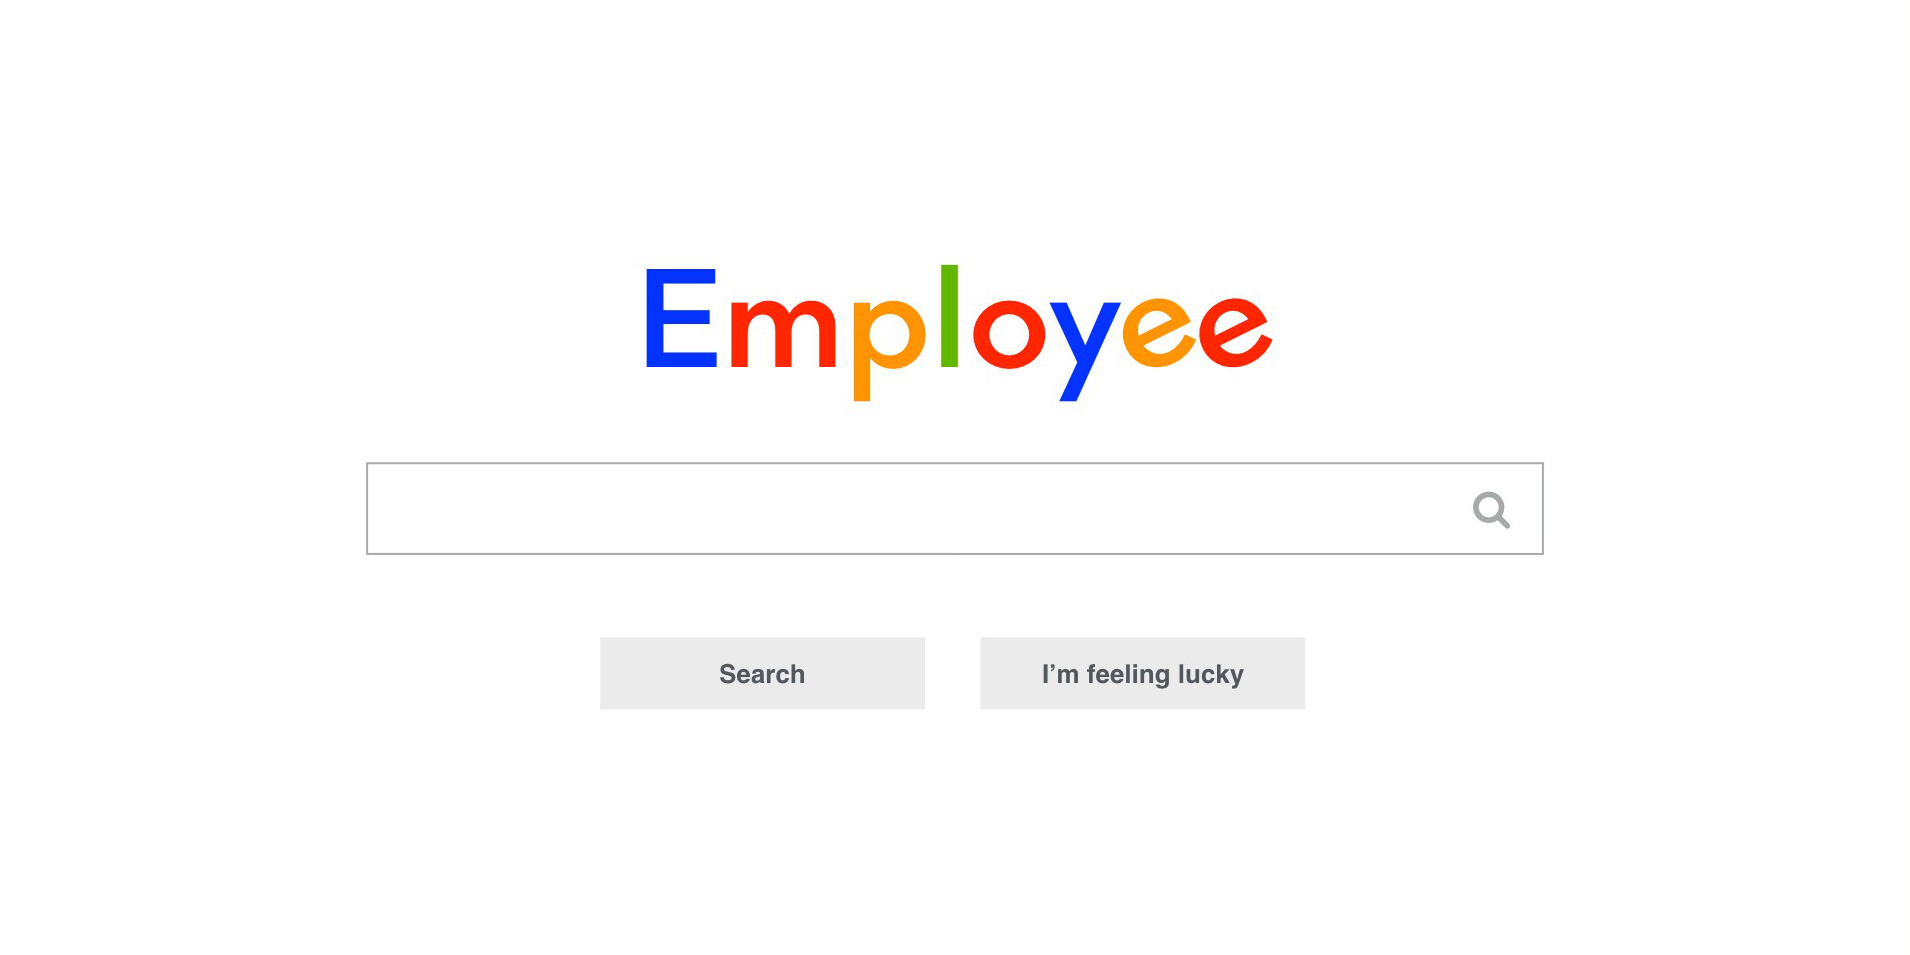 Employee search bar with two buttons Search and I